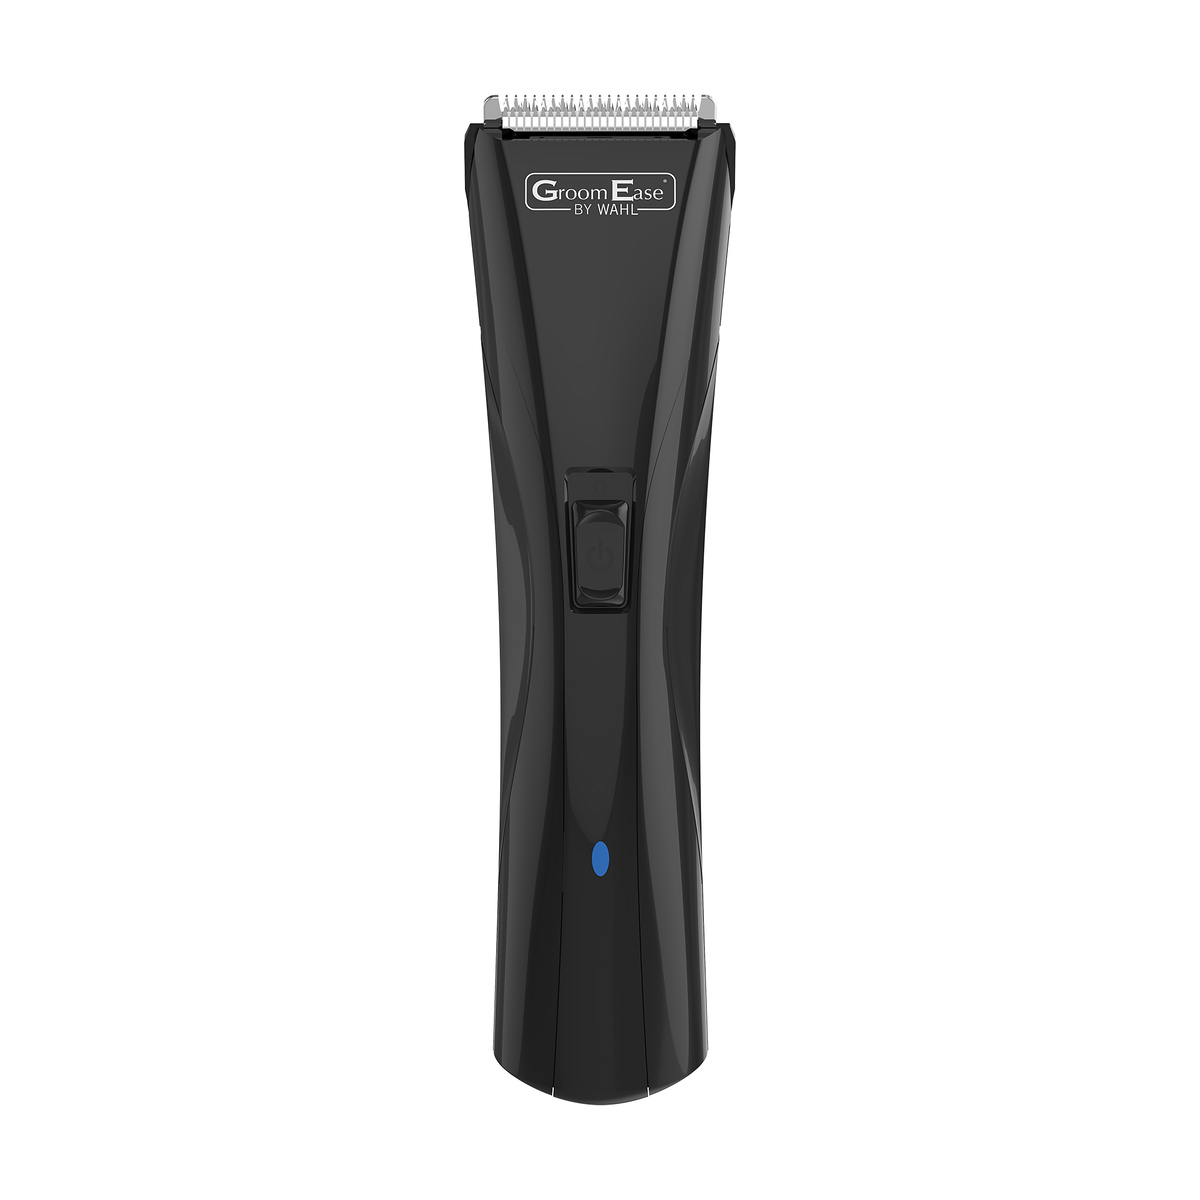 LED Cordless/Corded Mains Clipper WAHL